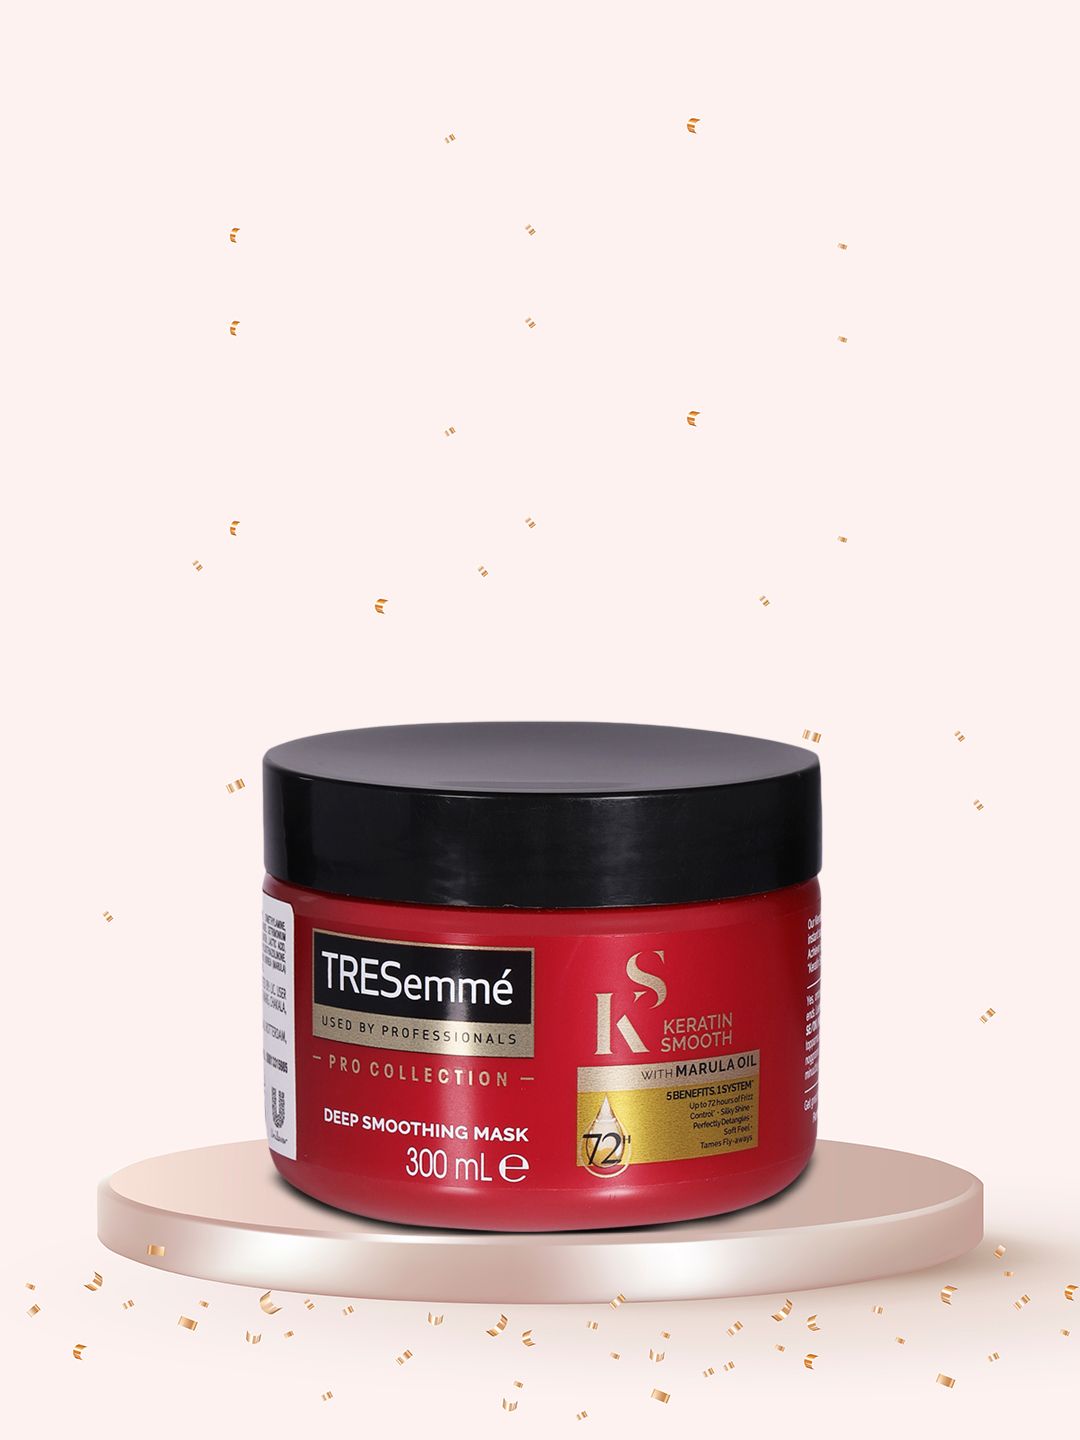 TRESemme Keratin Smooth Mask 300 ml Price in India